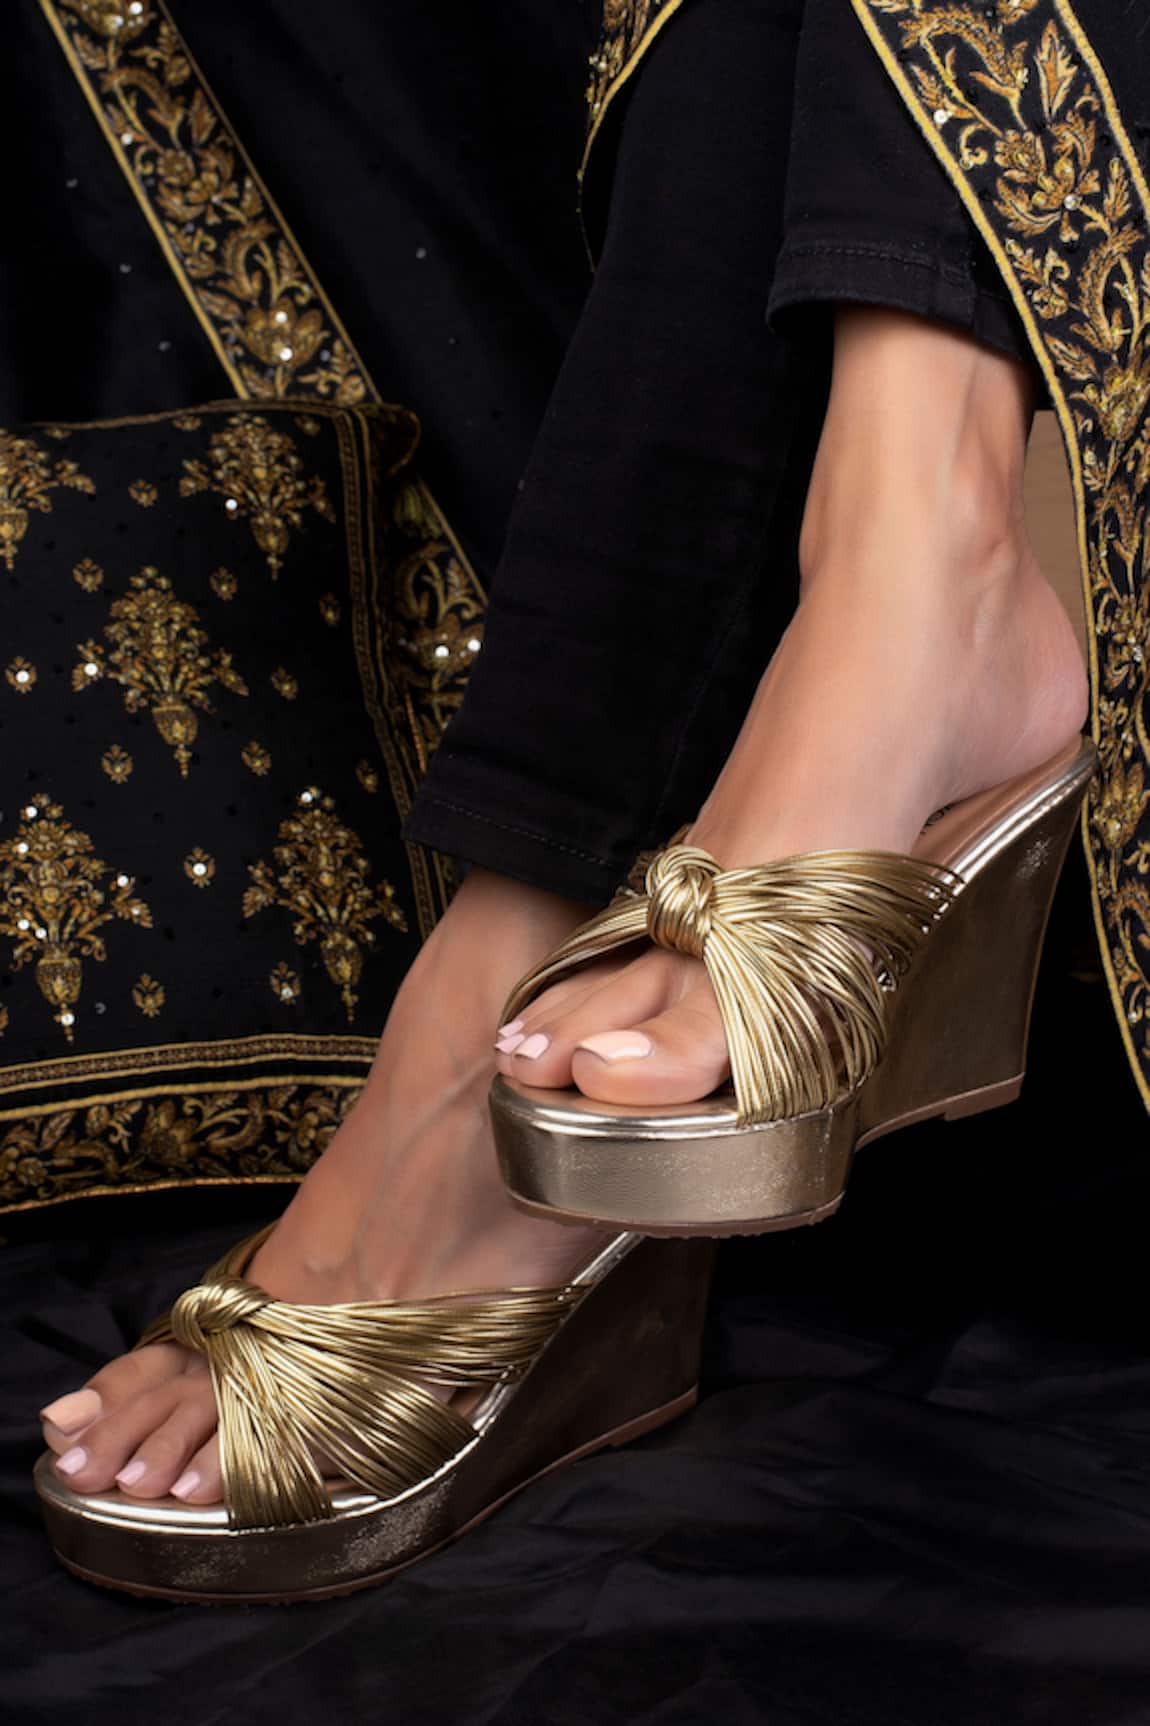 Elizee Shoes - Italian Handcrafted Luxurious Comfortable Shoes